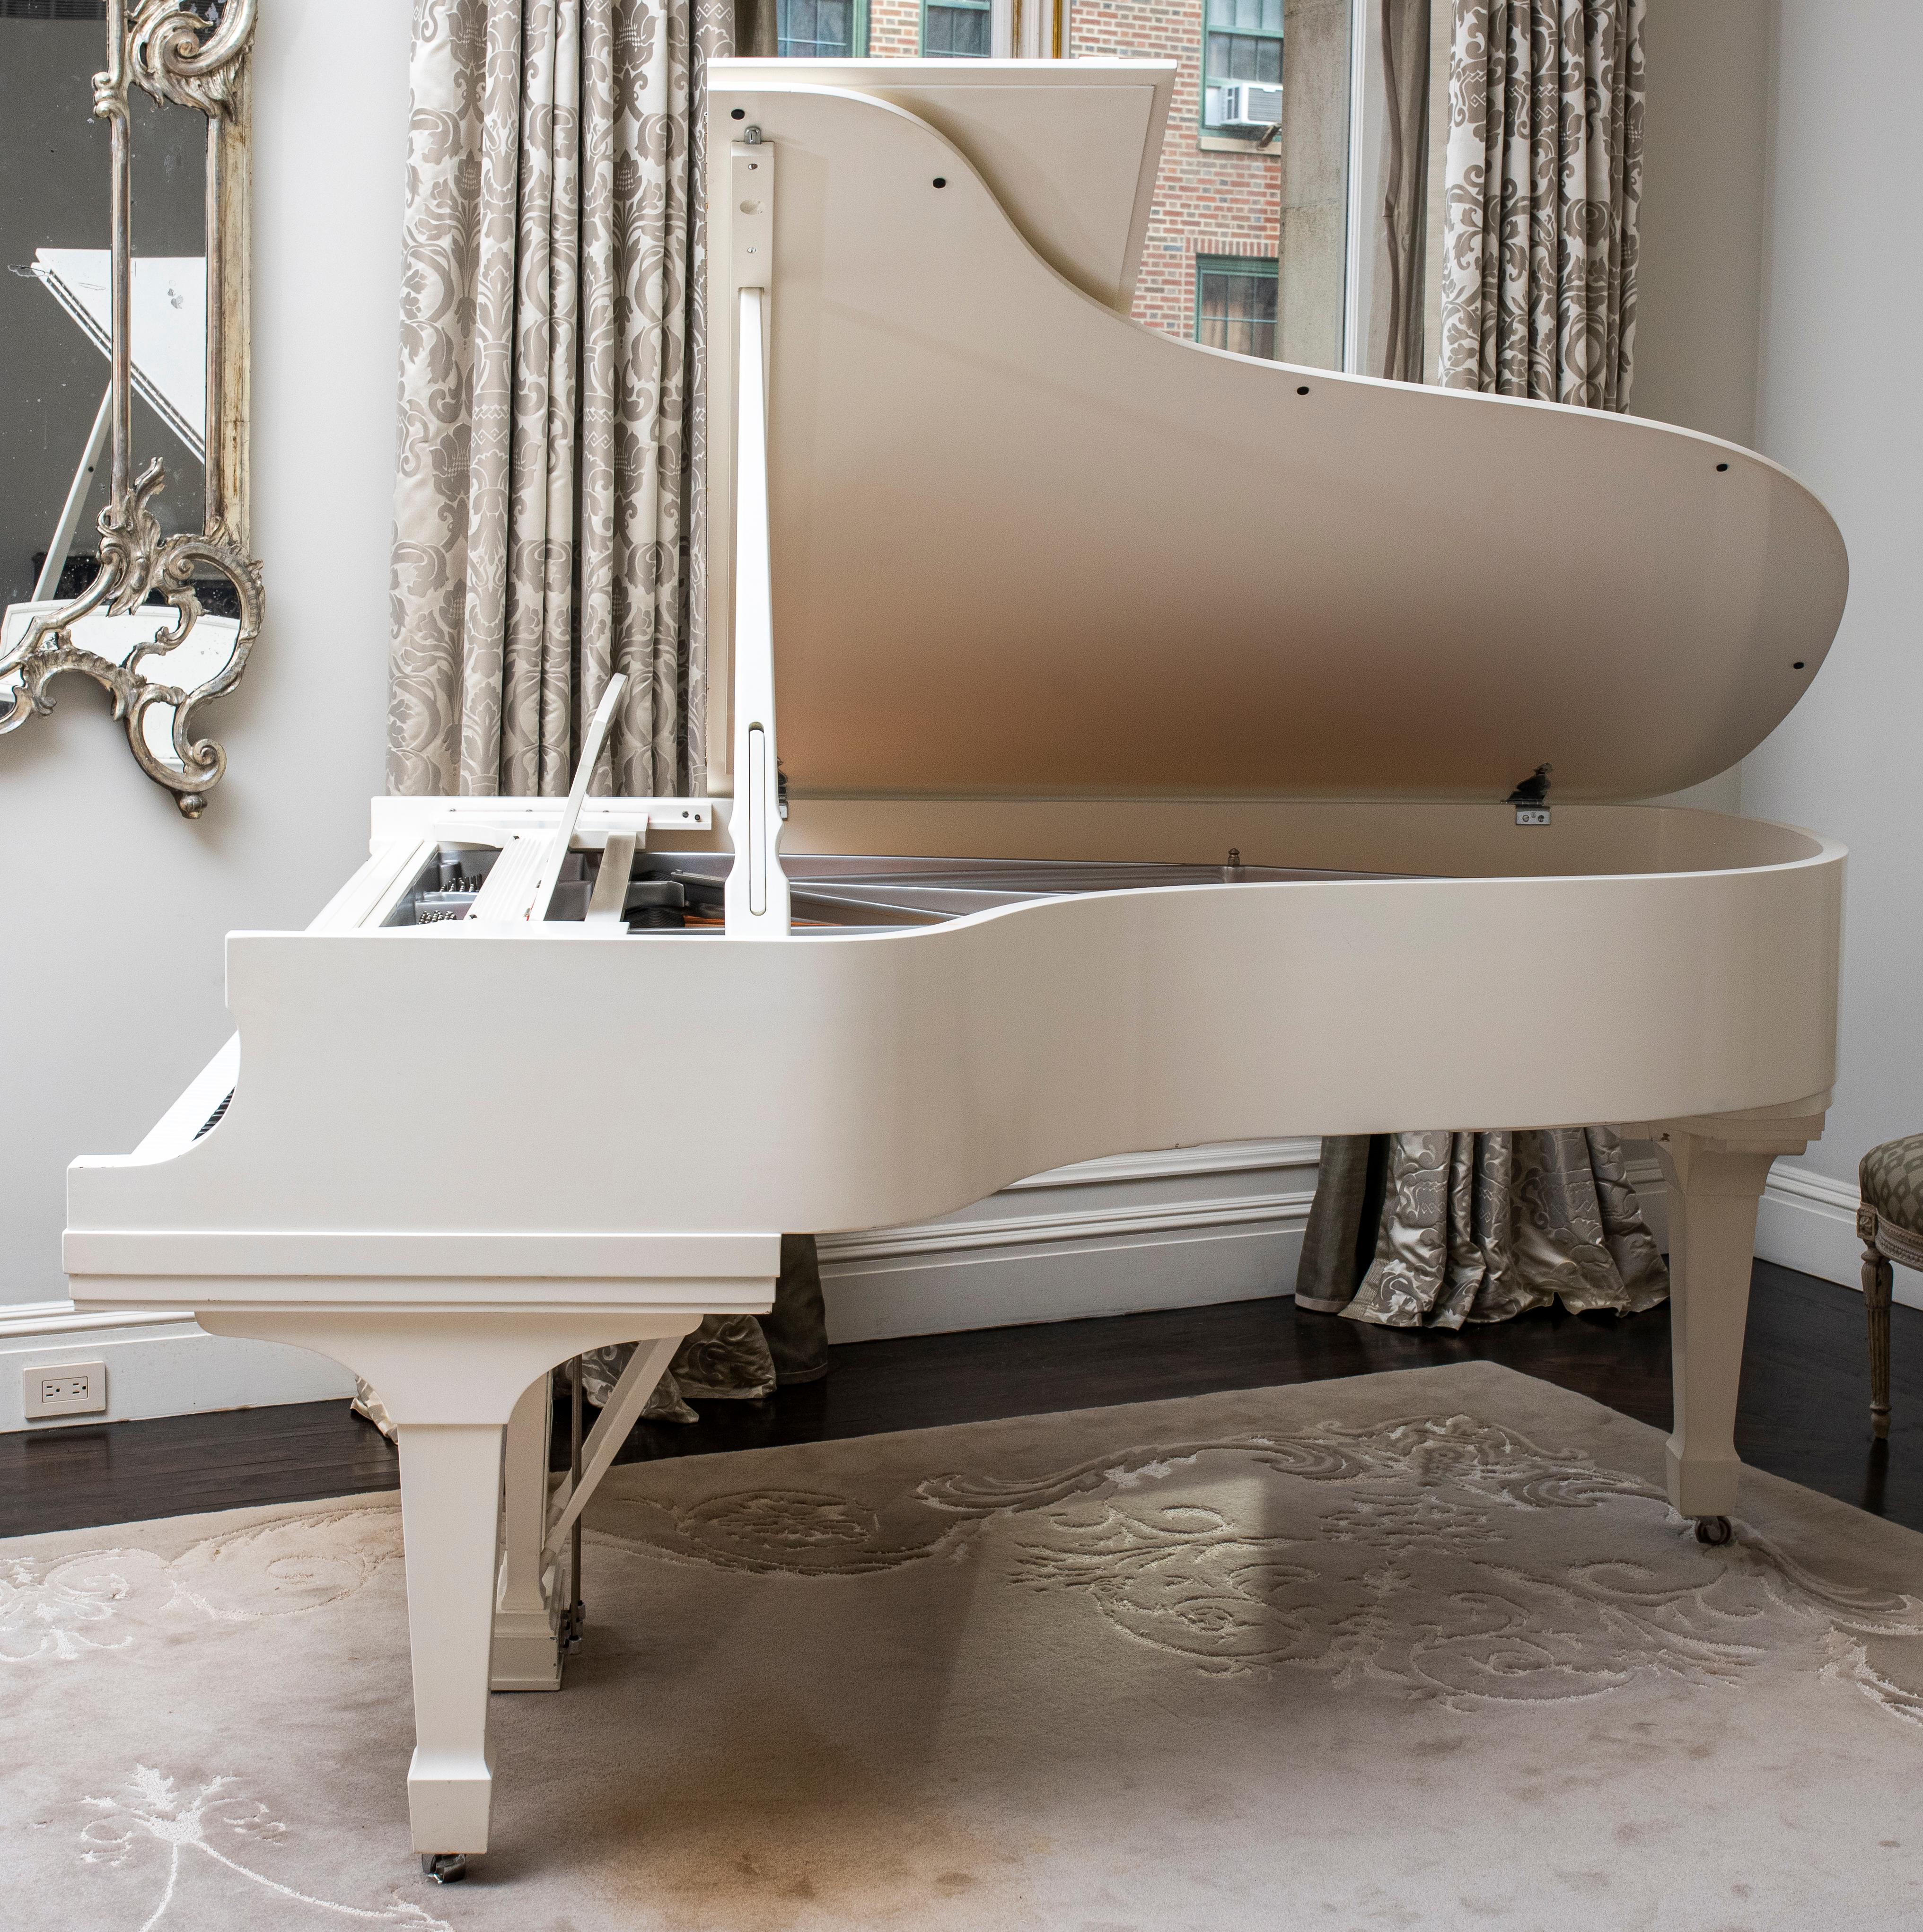 Manufactured in 2006, this Steinway & Sons 'Steinway B' grand piano in white lacquer is the perfect modern and unique talking point in any space. The piece is marked with serial number 576243, and is in great condition.